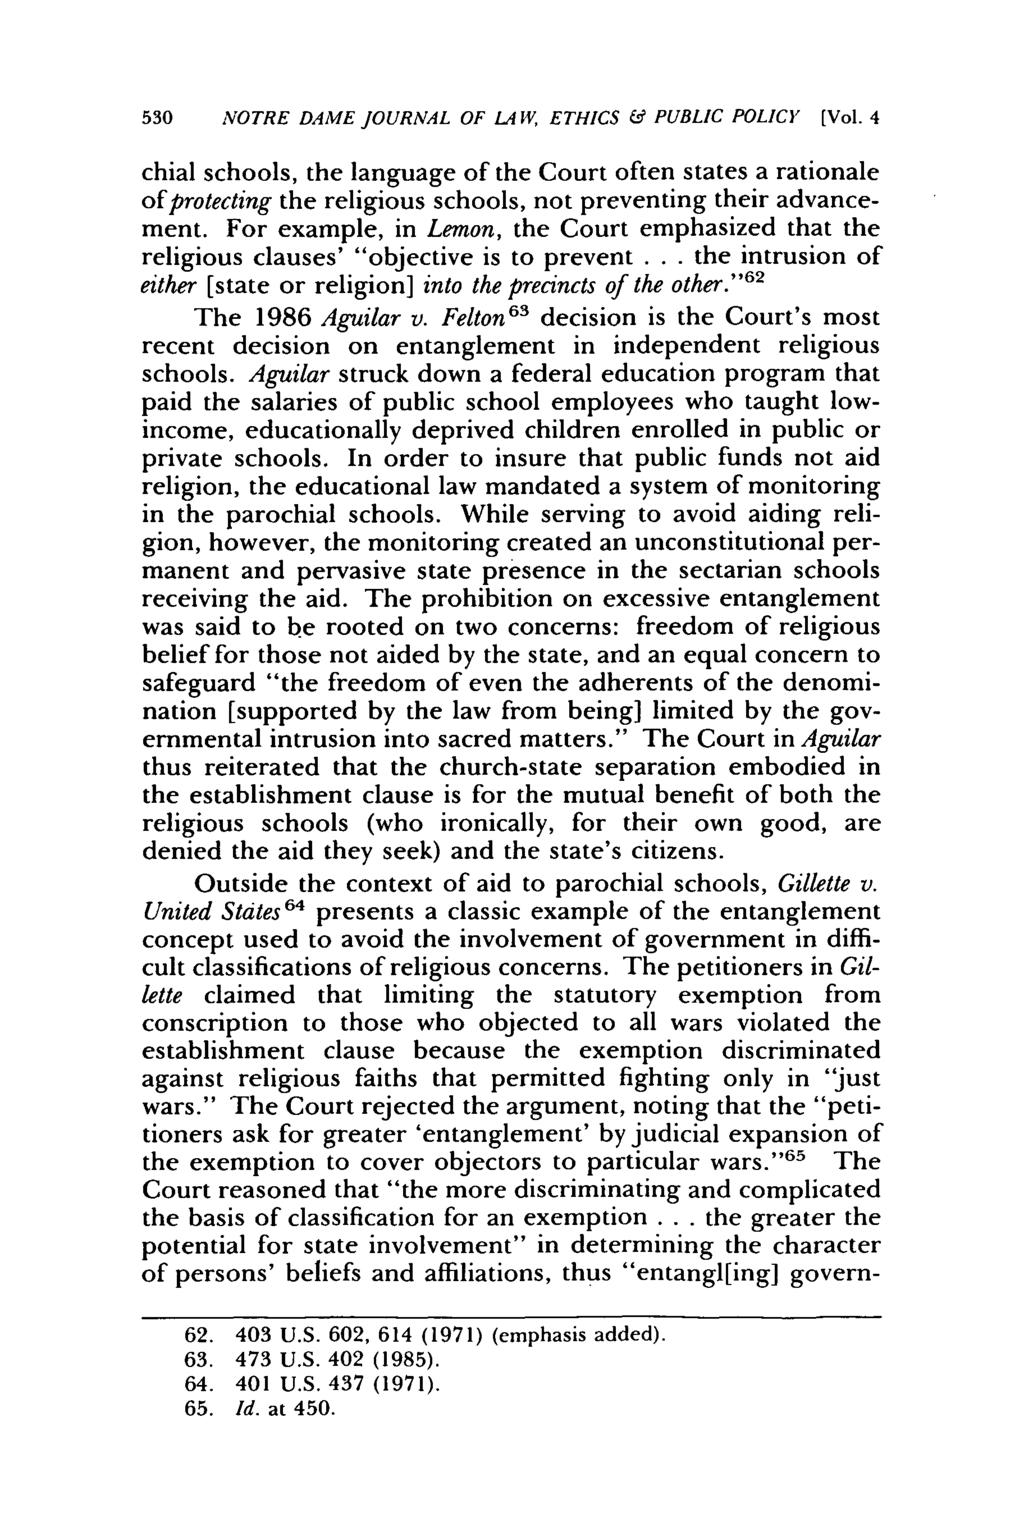 530 NOTRE DAME JOURNAL OF LAW, ETHICS & PUBLIC POLICY [Vol. 4 chial schools, the language of the Court often states a rationale of protecting the religious schools, not preventing their advancement.